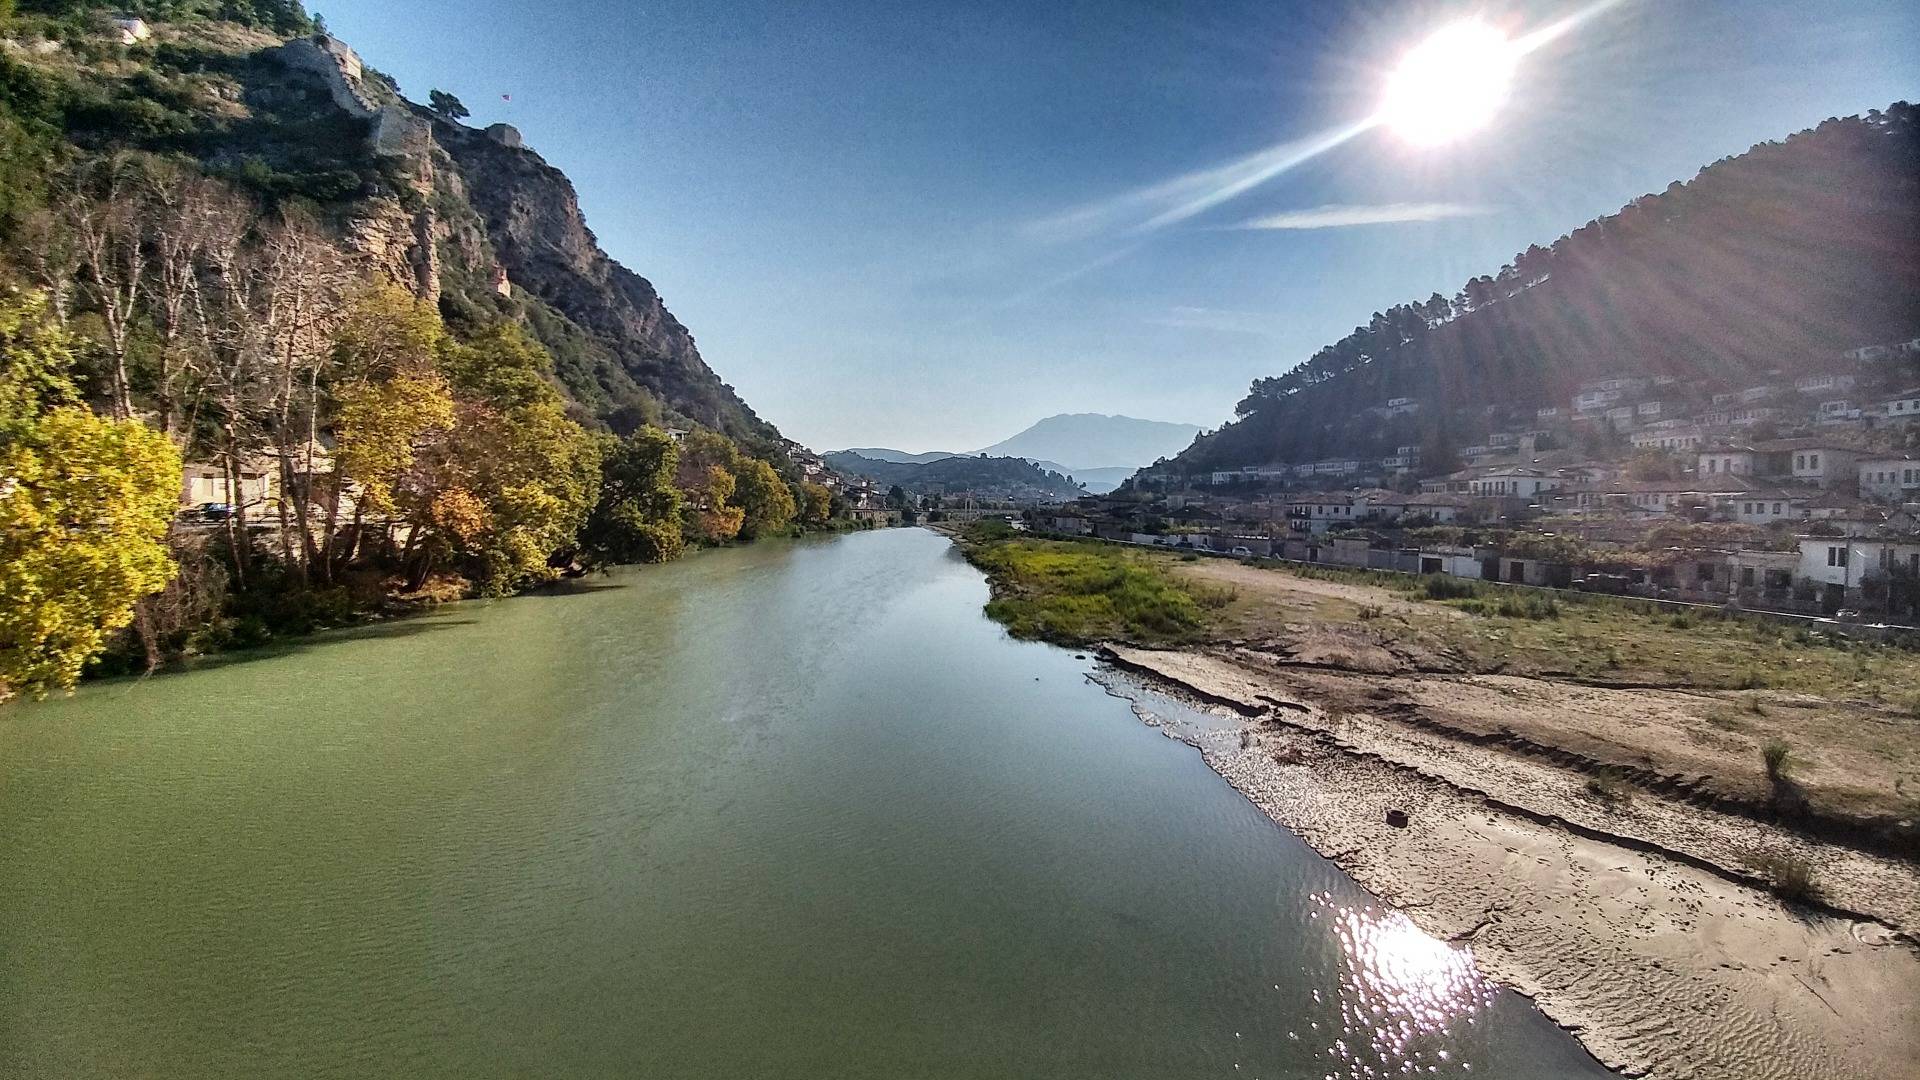 On the right side: Berat